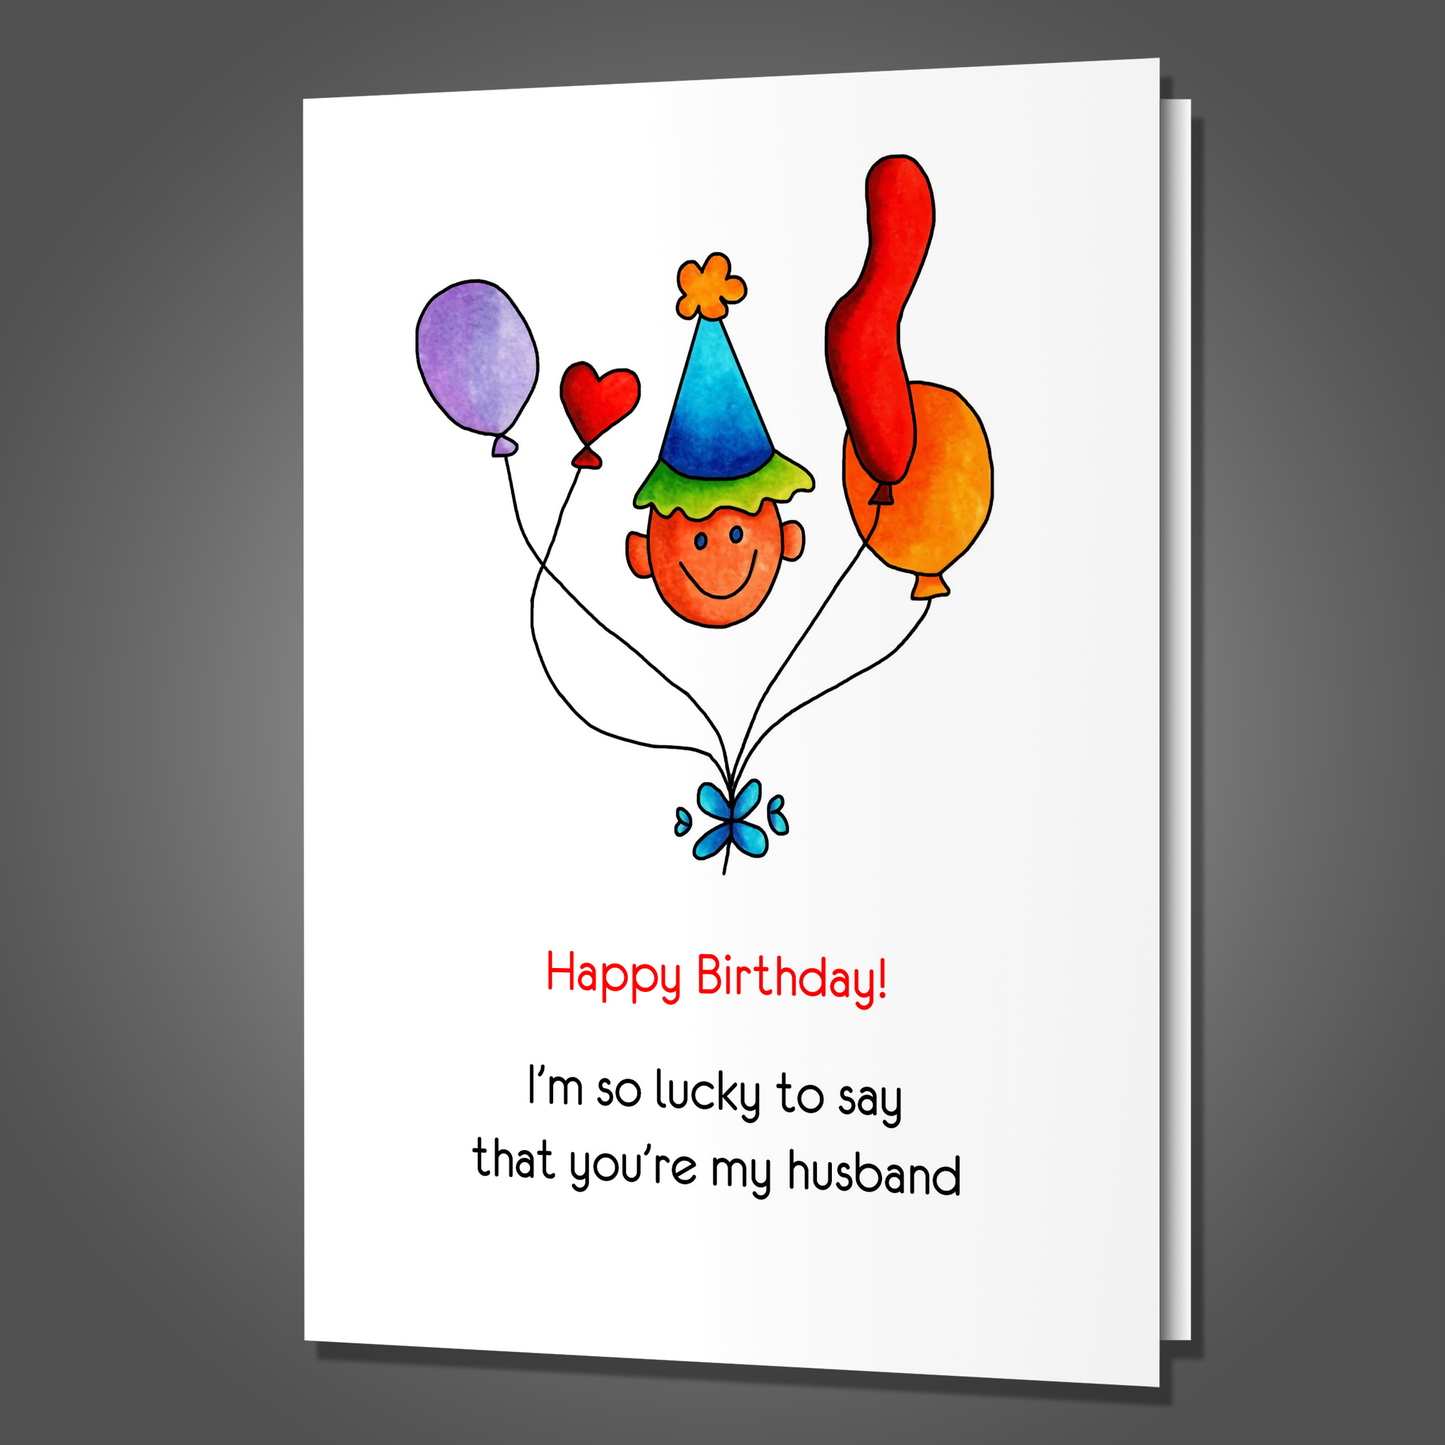 Talk Shit About You, Birthday Card